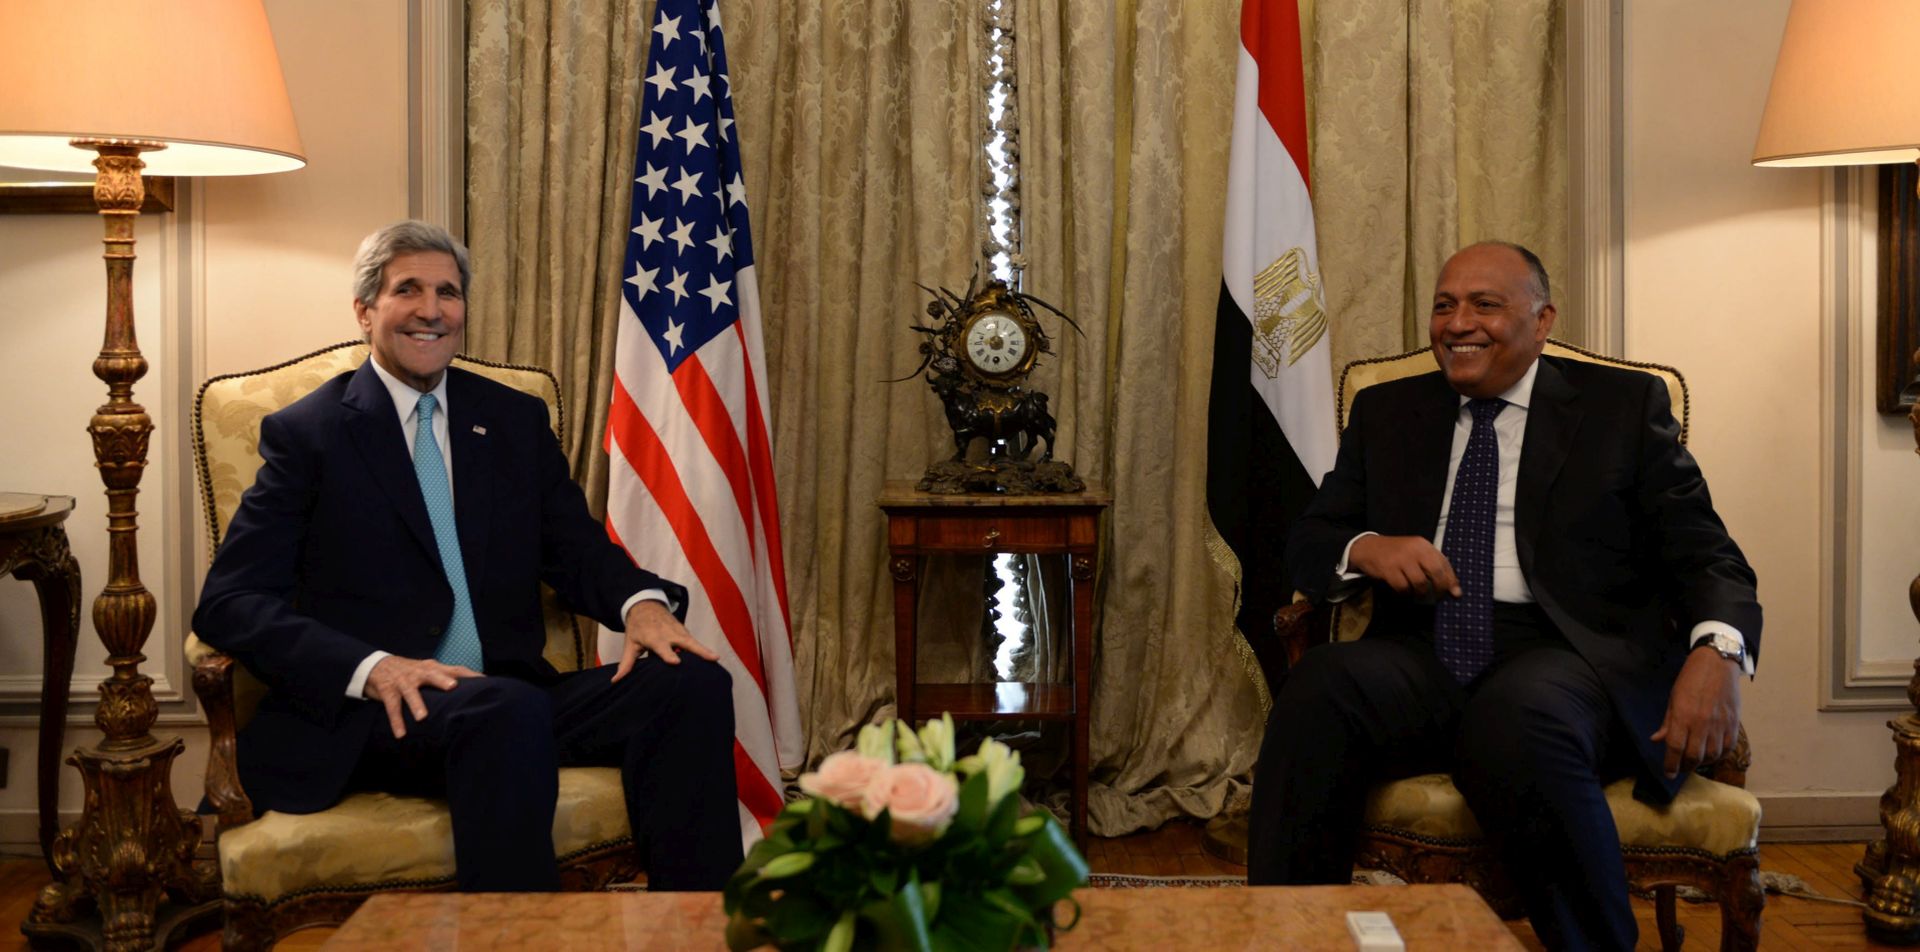 epa04869574 US Secretary of state John Kerry (L) meet his Egyptian conterpart Sameh Shoukry (R) in Cairo 2 August 2015 as part of what is being described as a strategic dialogue  between the two countries, including bilateral relations,   and the latest developments in the Middle East.  EPA/MOHAMED HOSSAM